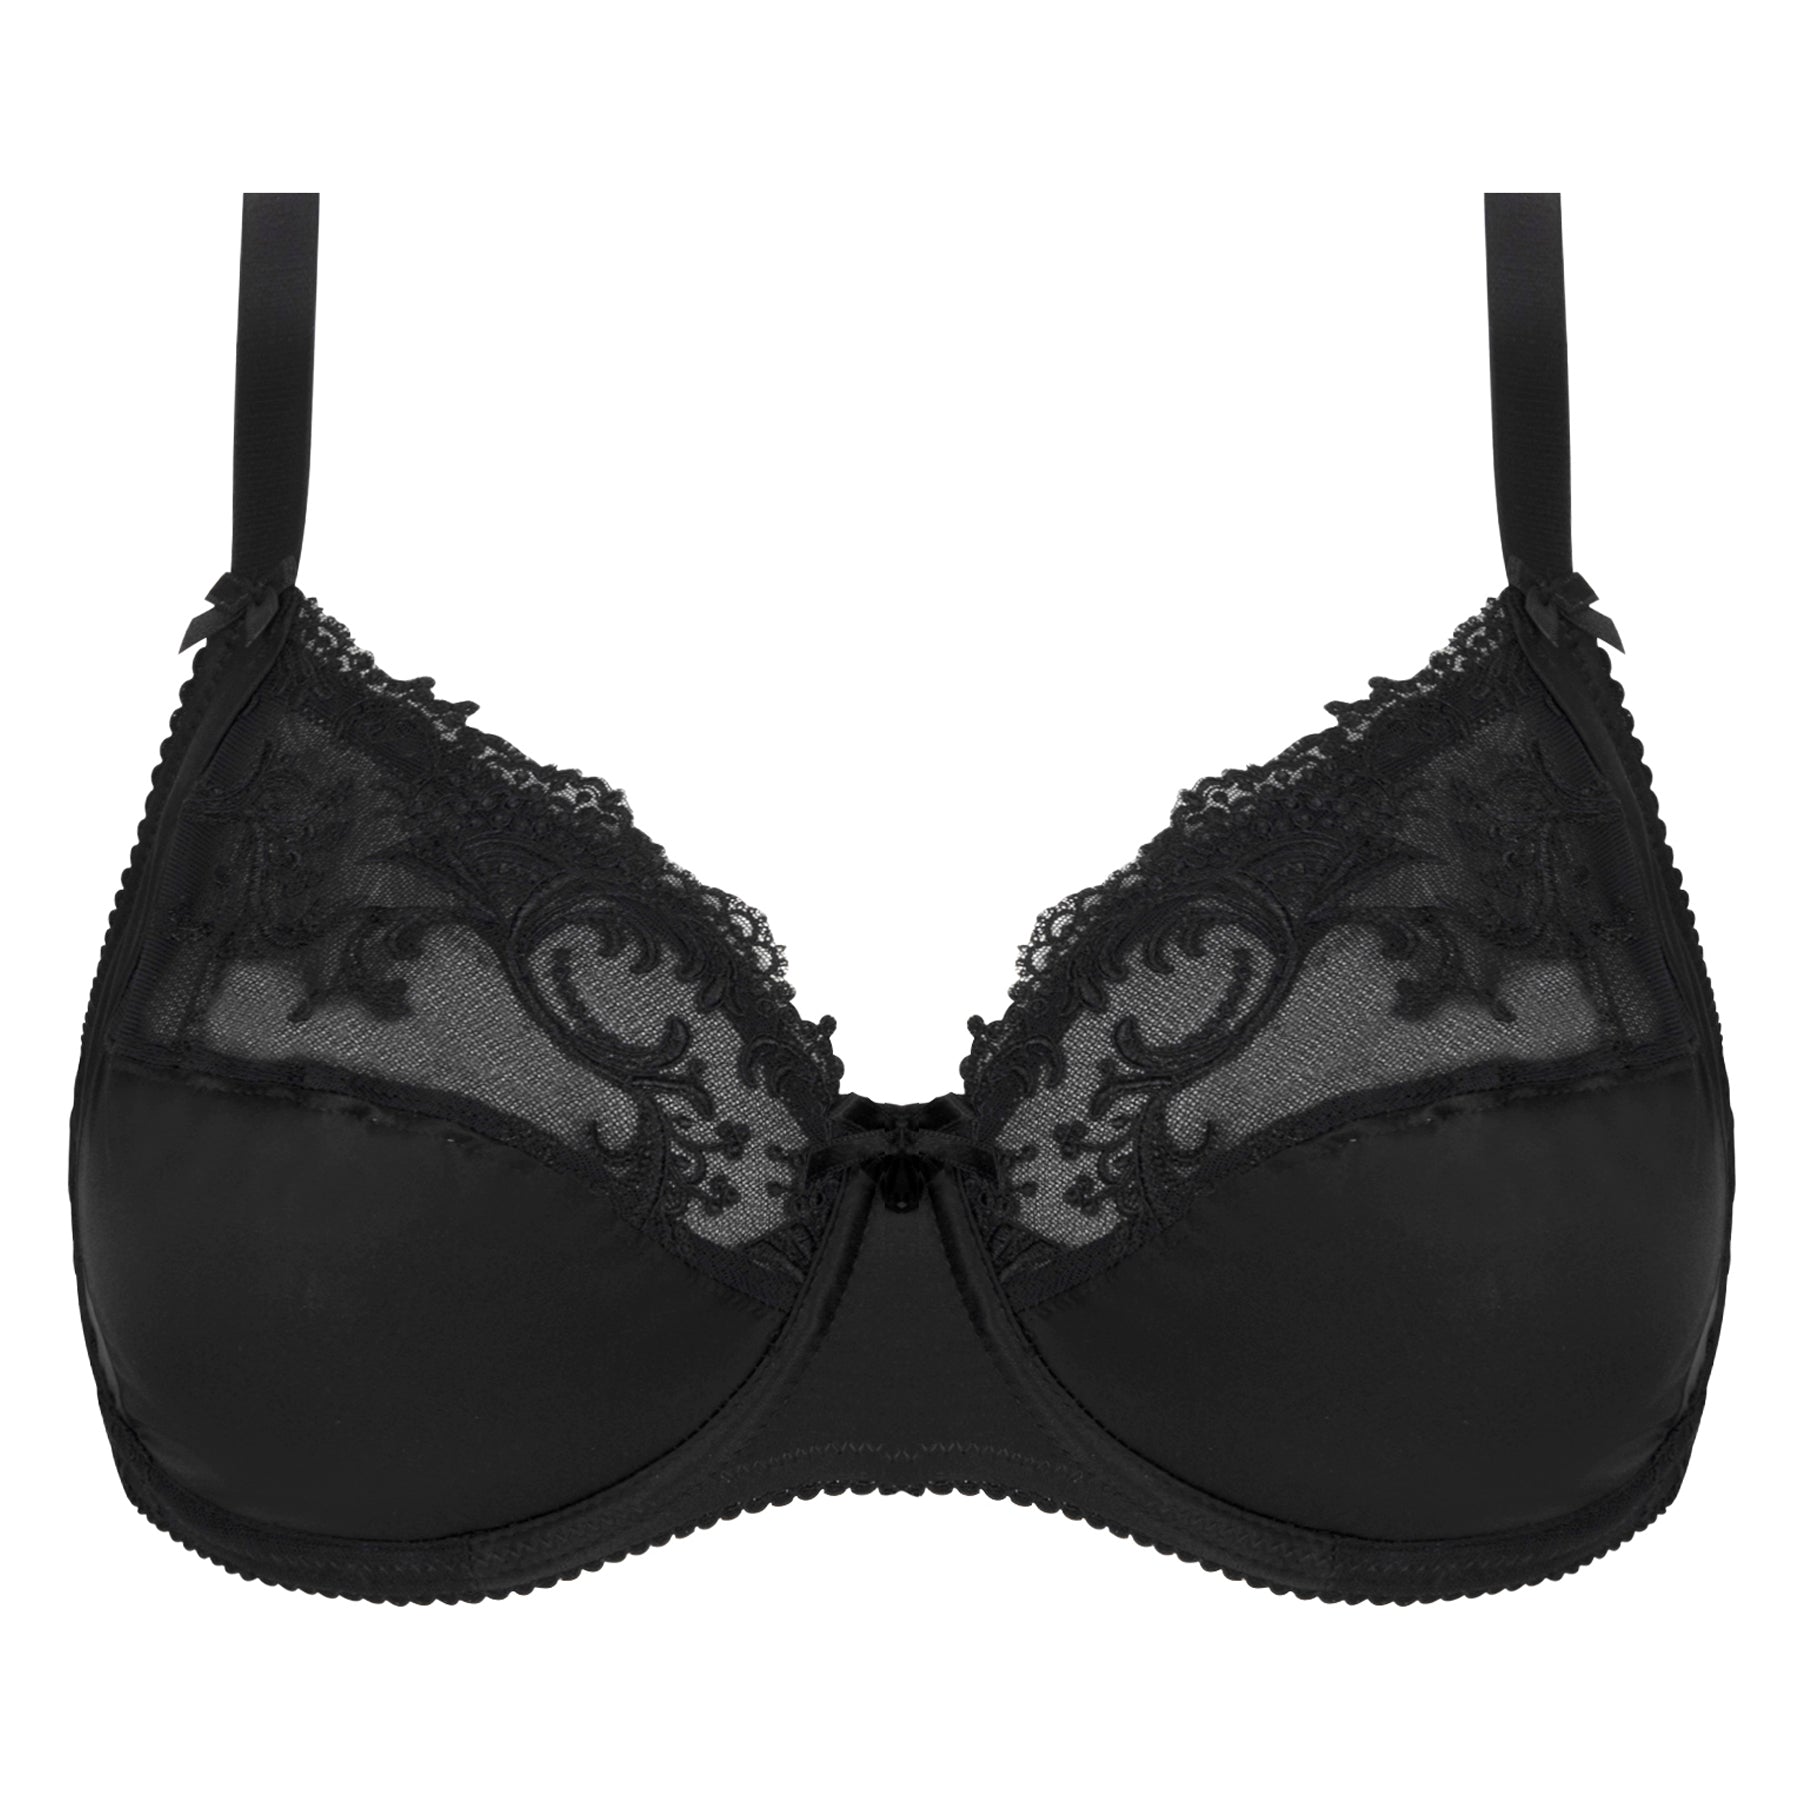 Lingerie Review: Maison Lejaby “Crystal” Padded Demi-Cup Bra in